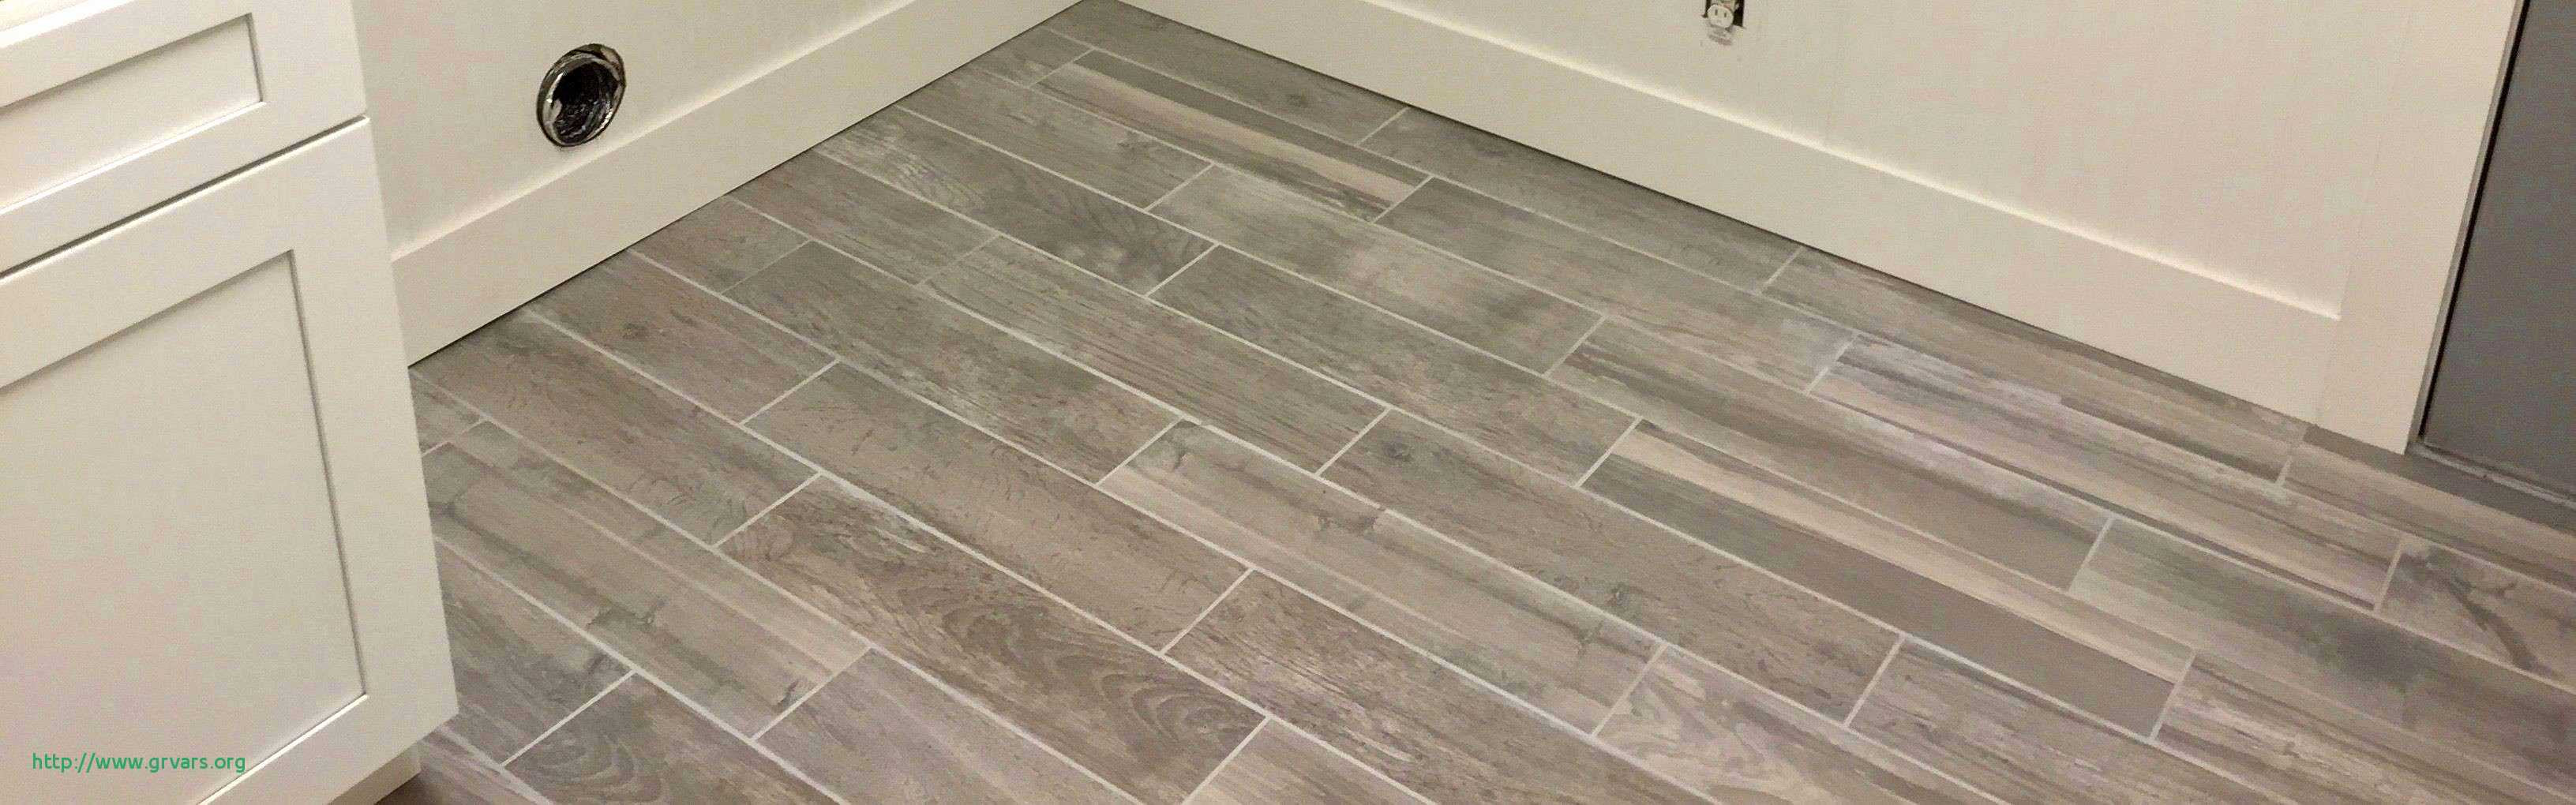 21 Unique Best Hardwood Flooring toronto 2024 free download best hardwood flooring toronto of 22 ac289lagant what can i clean hardwood floors with ideas blog pertaining to unique bathroom tiling ideas best h sink install bathroom i 0d exciting beauti